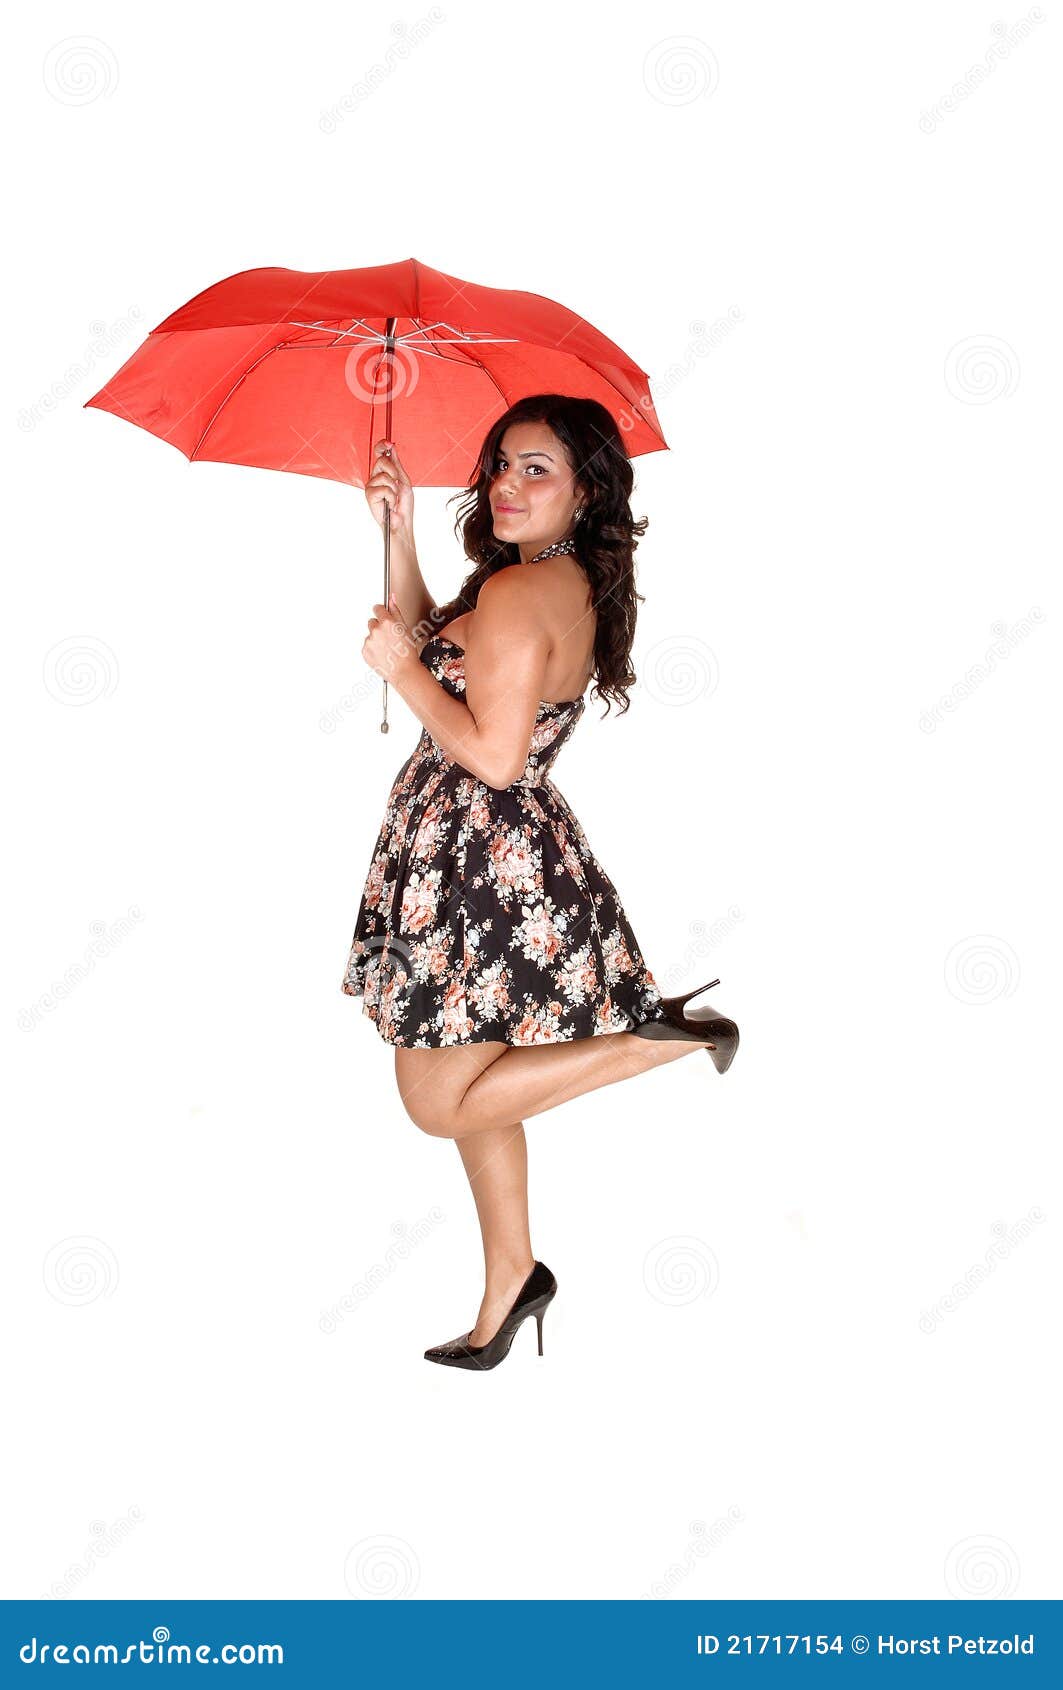 Girl with red umbrella. stock photo. Image of protective - 21717154